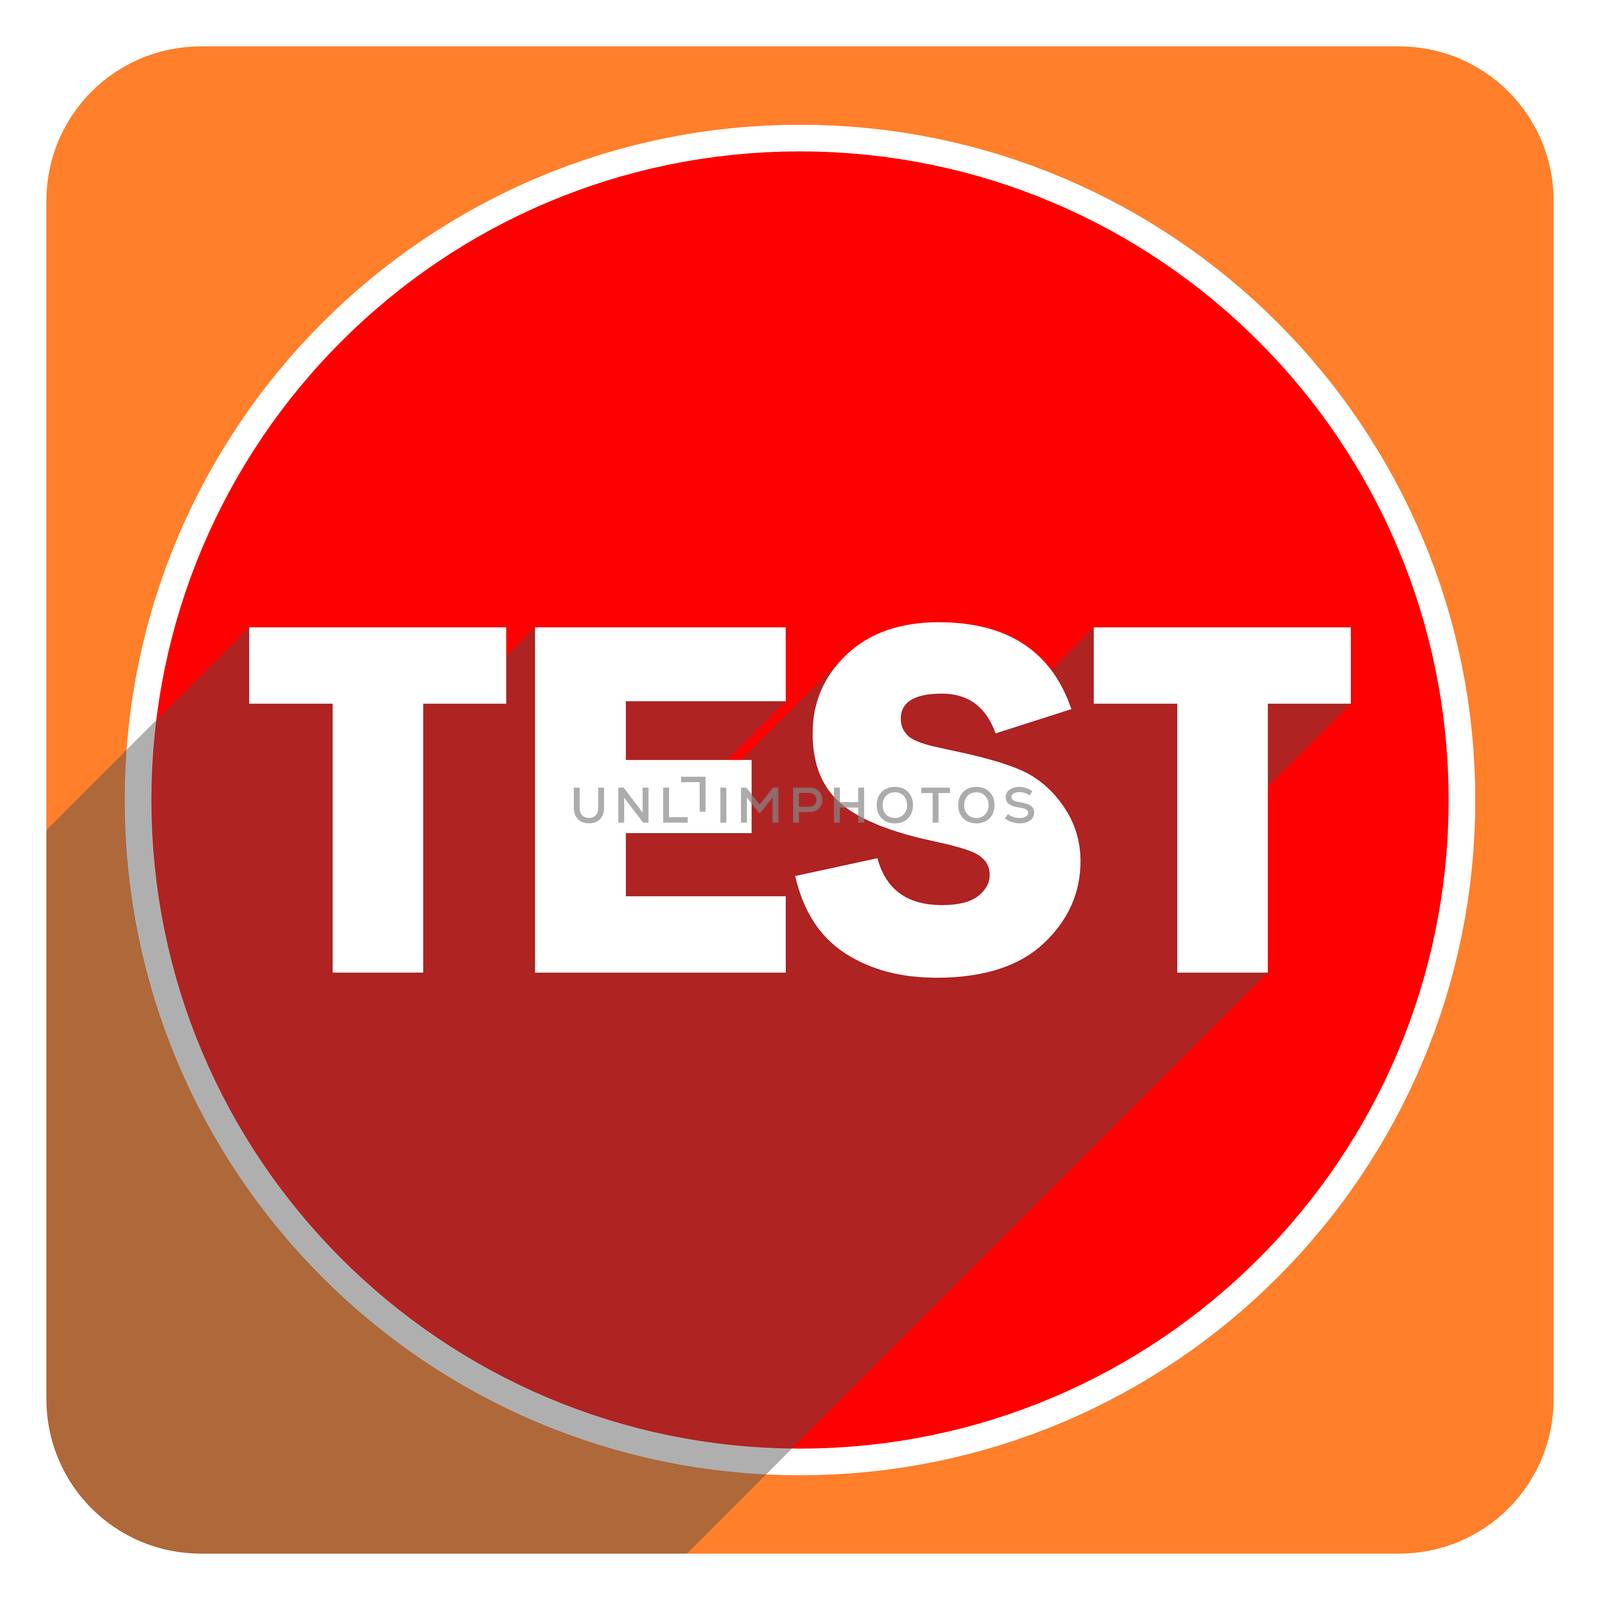 test red flat icon isolated